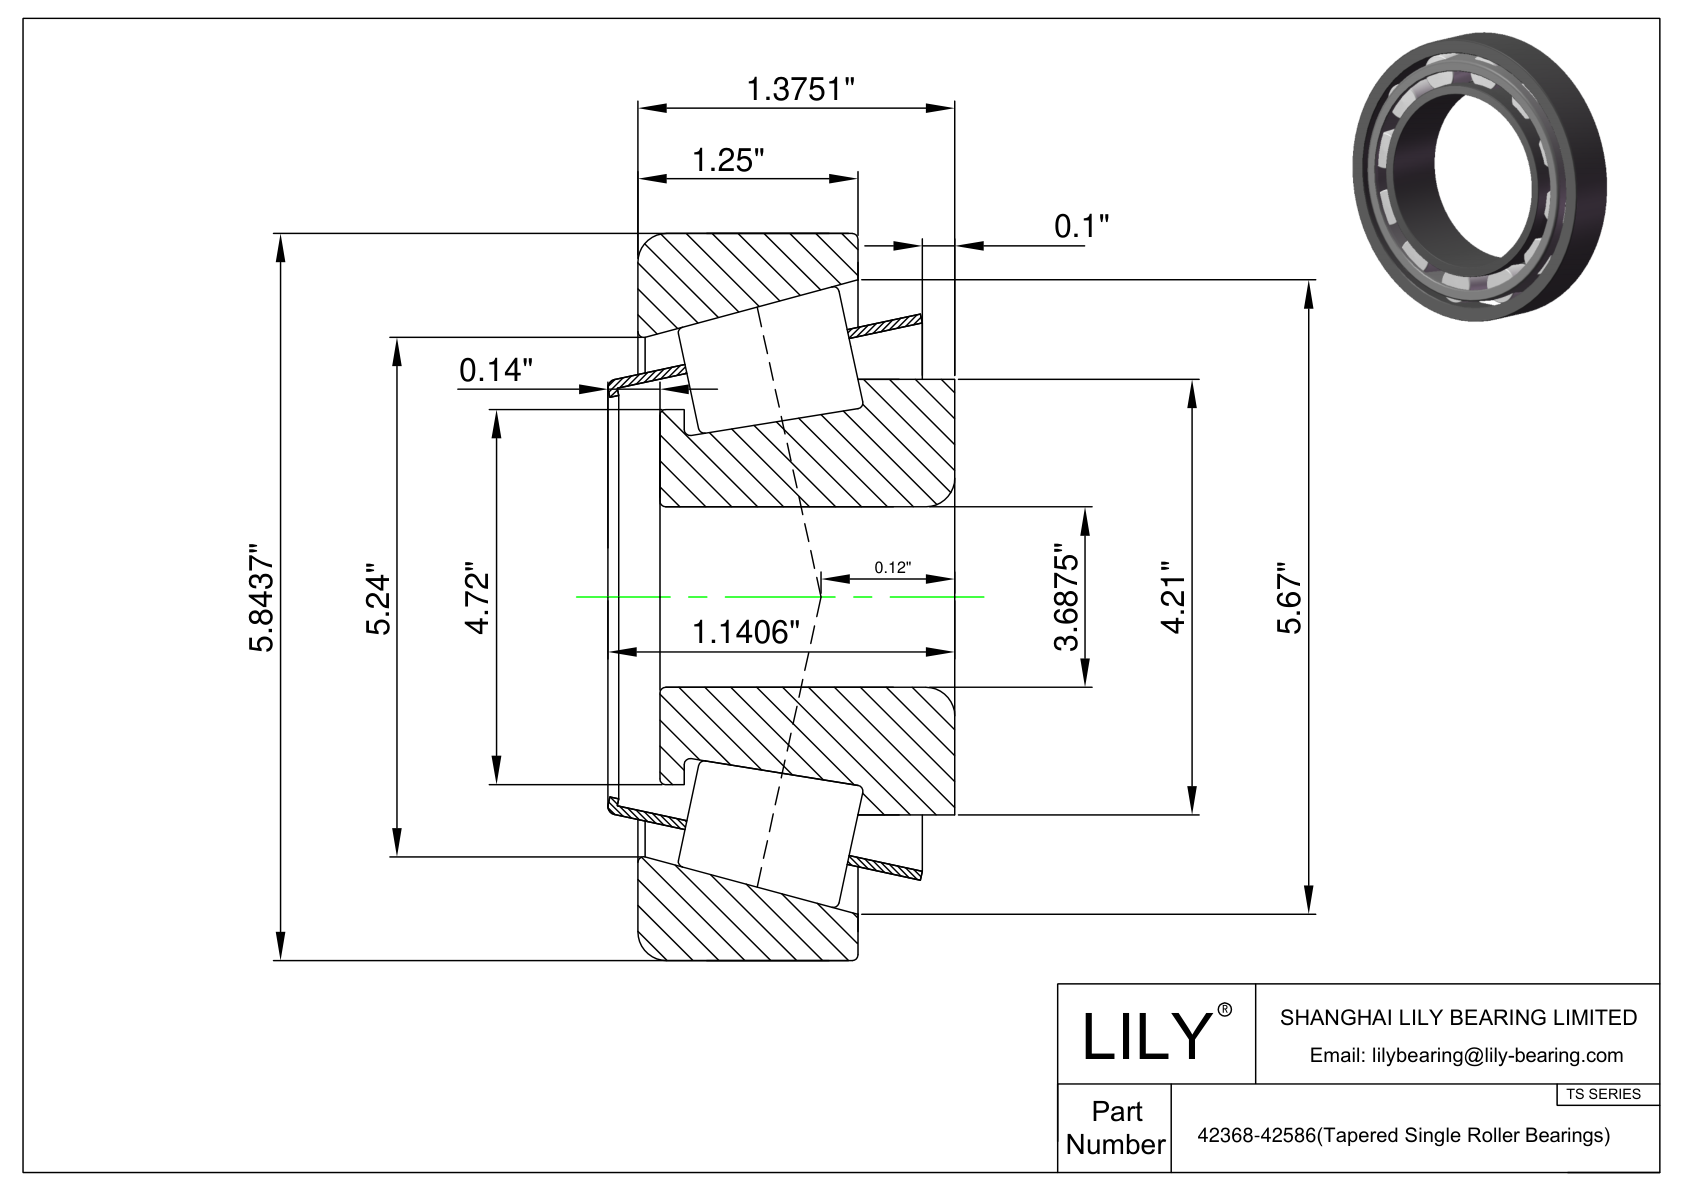 42368-42586 TS (Tapered Single Roller Bearings) (Imperial) cad drawing